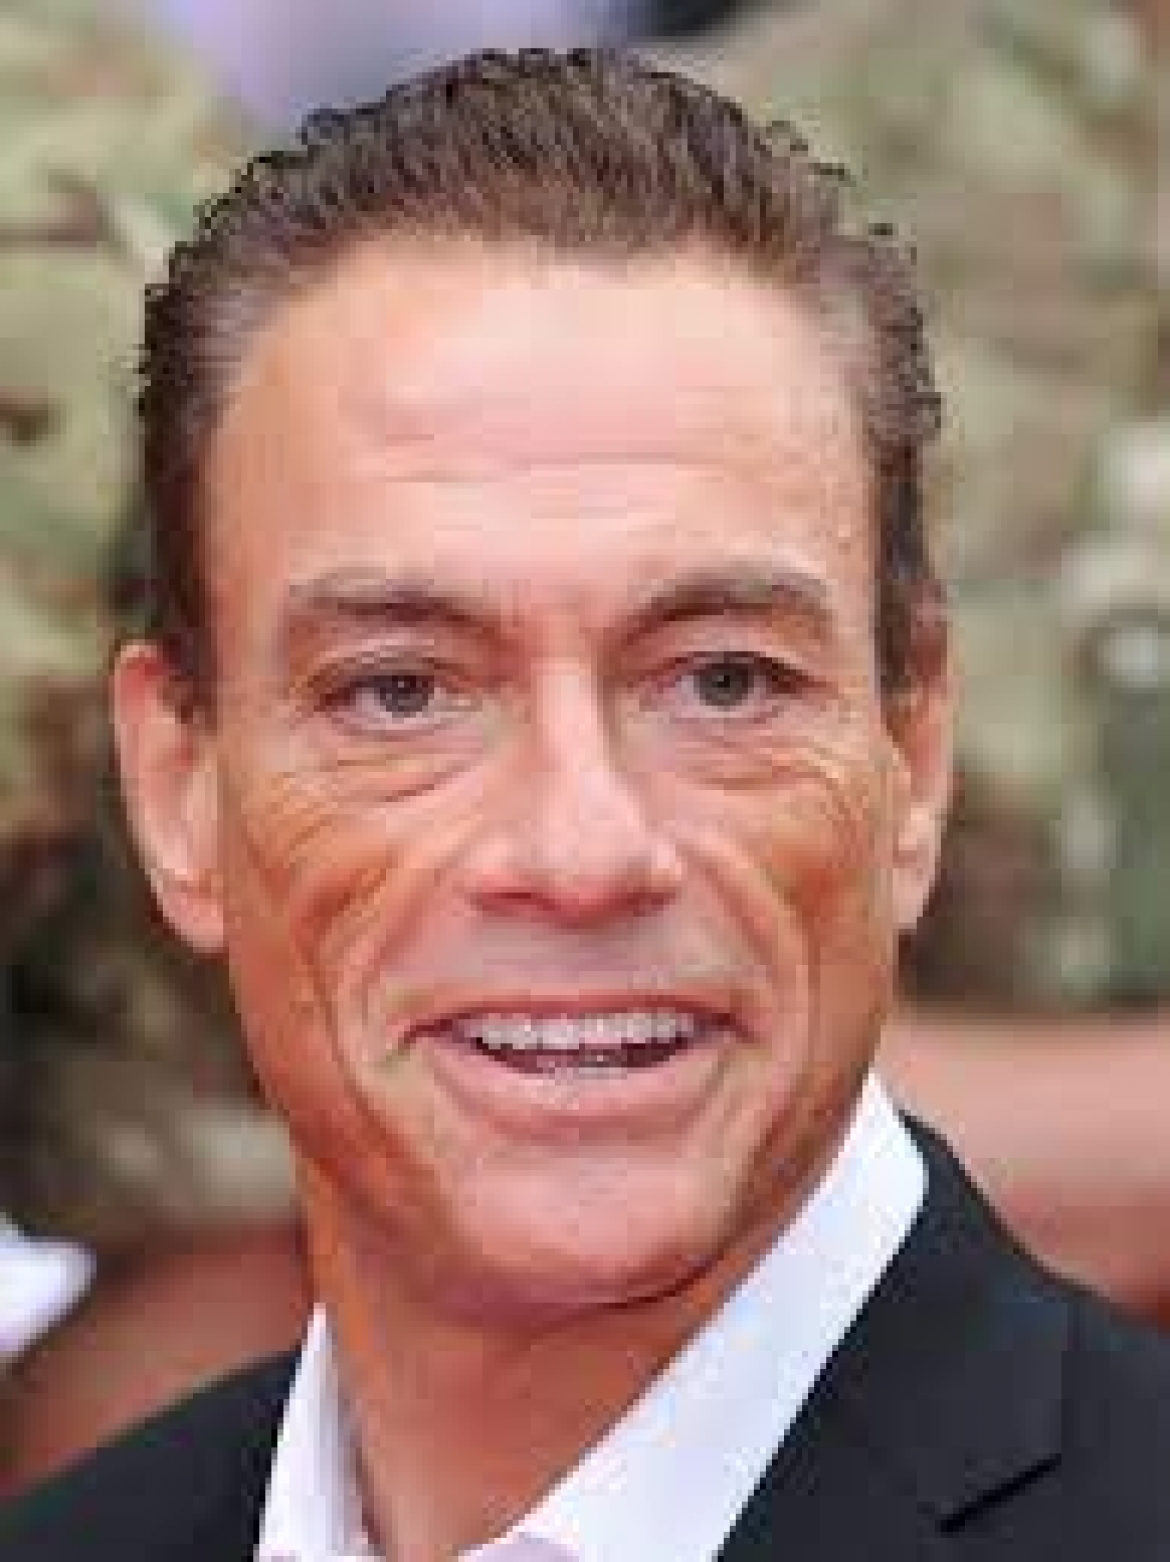 CLAUDE VAN DAMME FEUD WITH STEVEN SEAGAL TAKES ANOTHER TURN